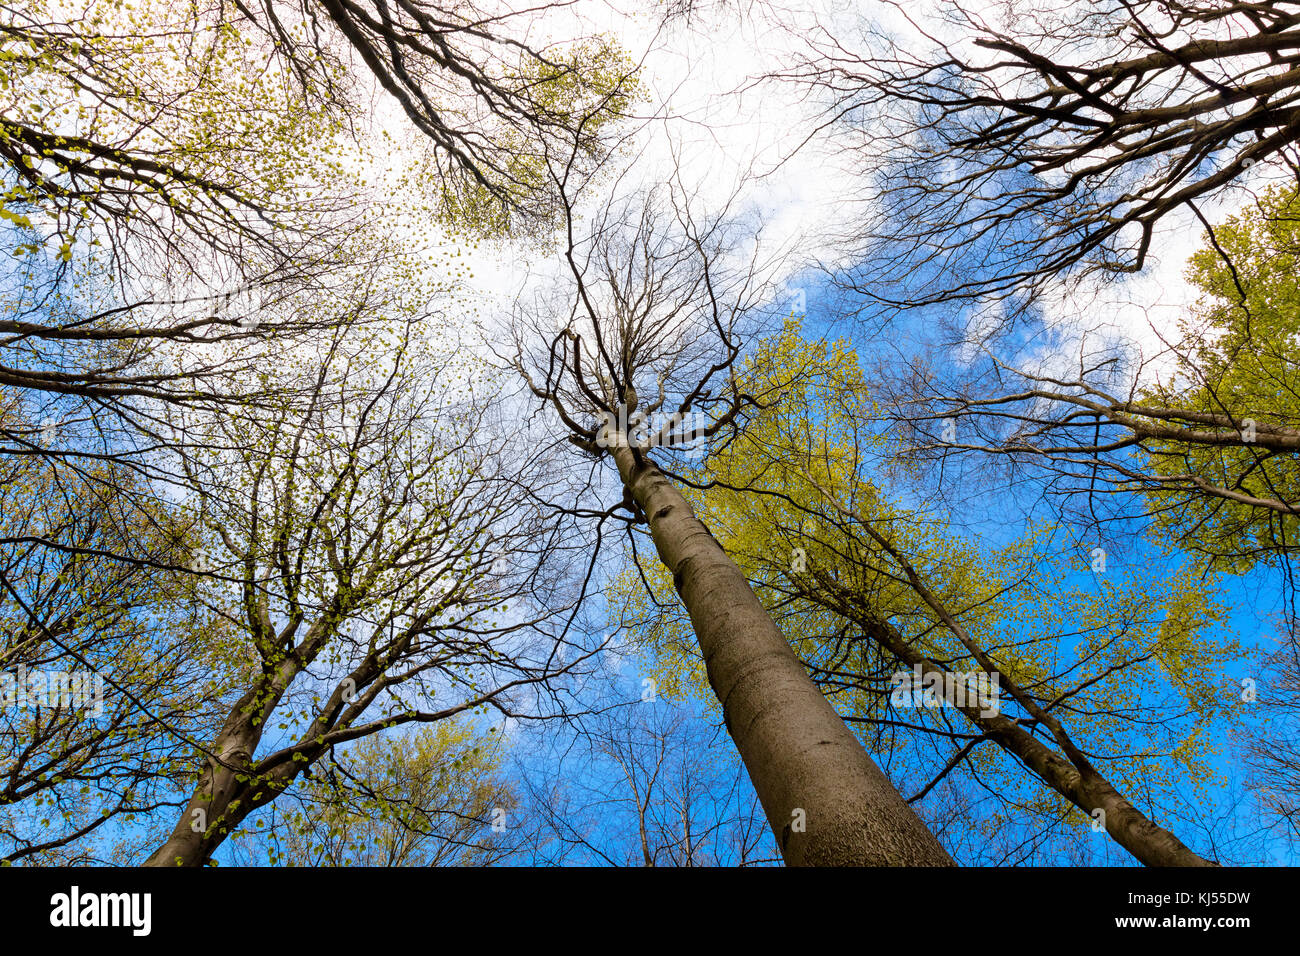 Upward view branches of trees in a forest under blue sky and clouds Stock Photo